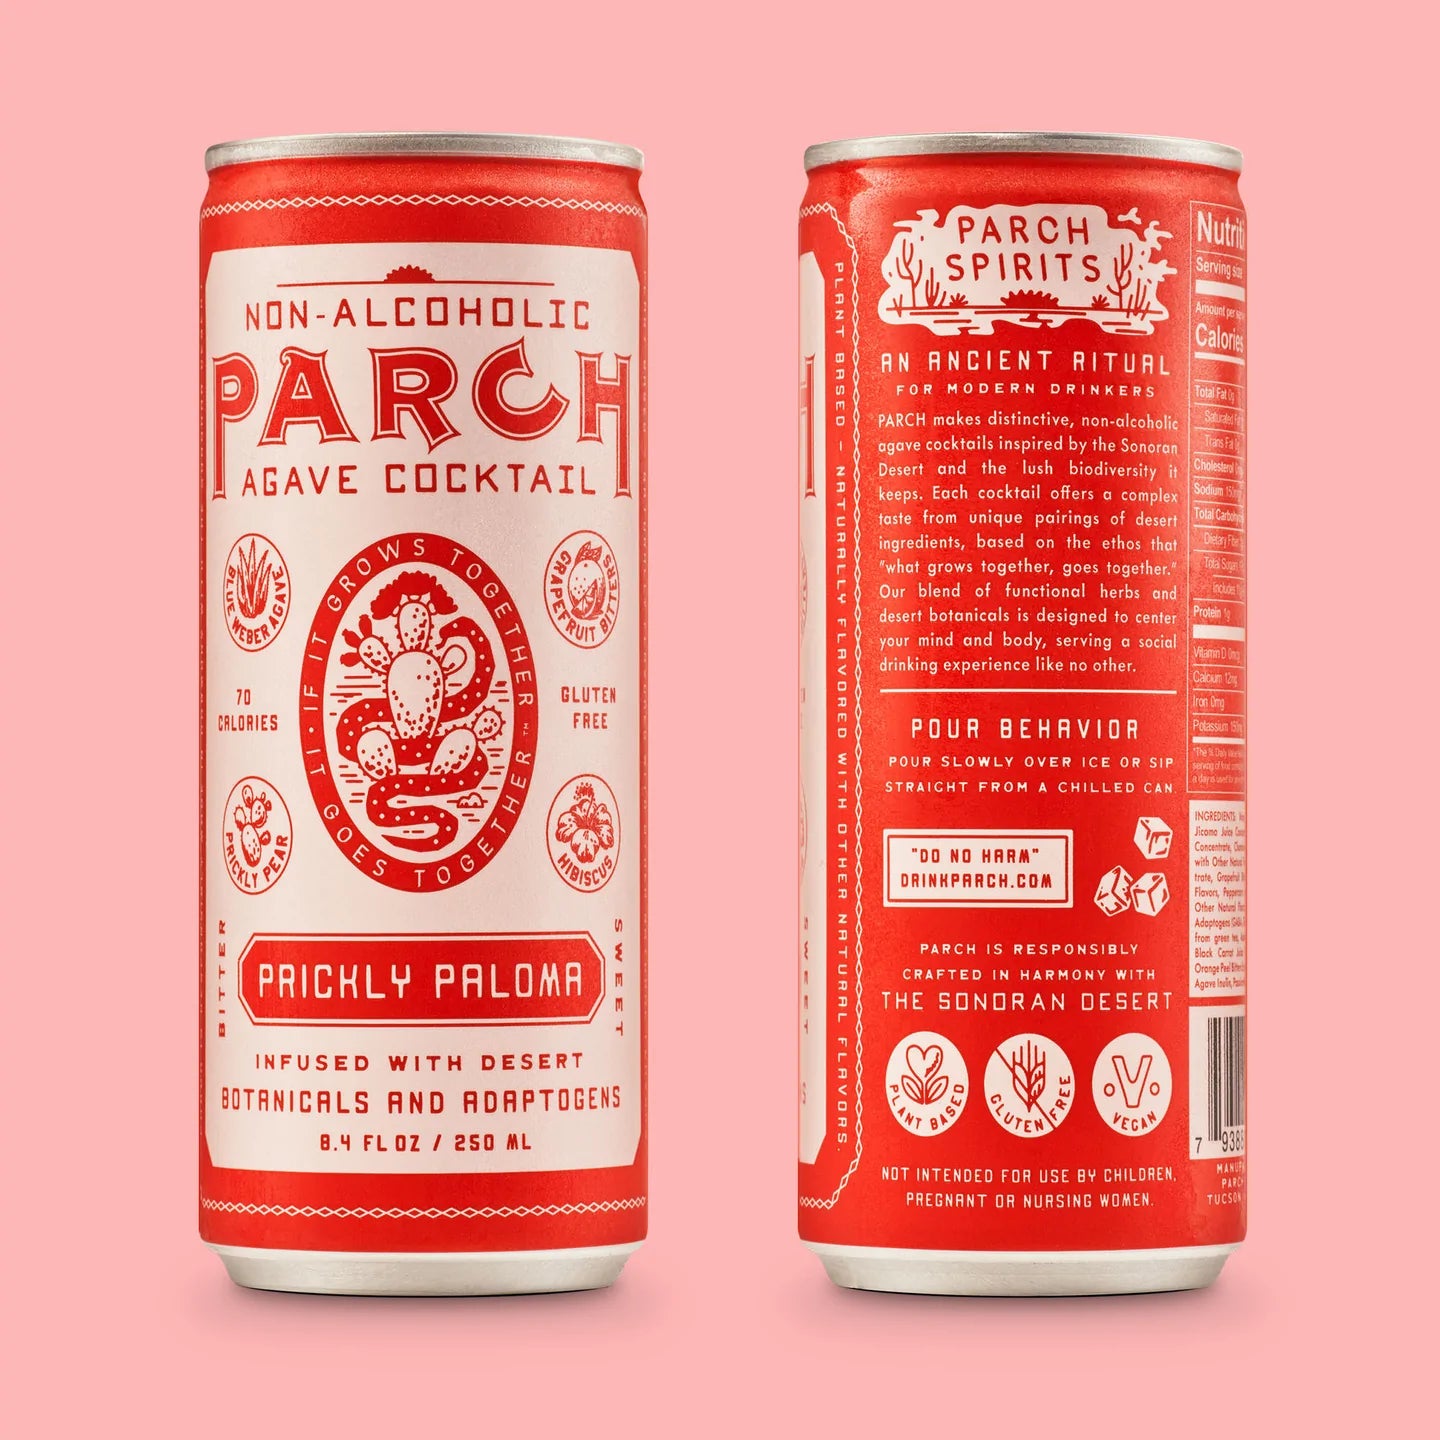 Parch Prickly Paloma Non-Alcoholic Agave Cocktail (4-pack)